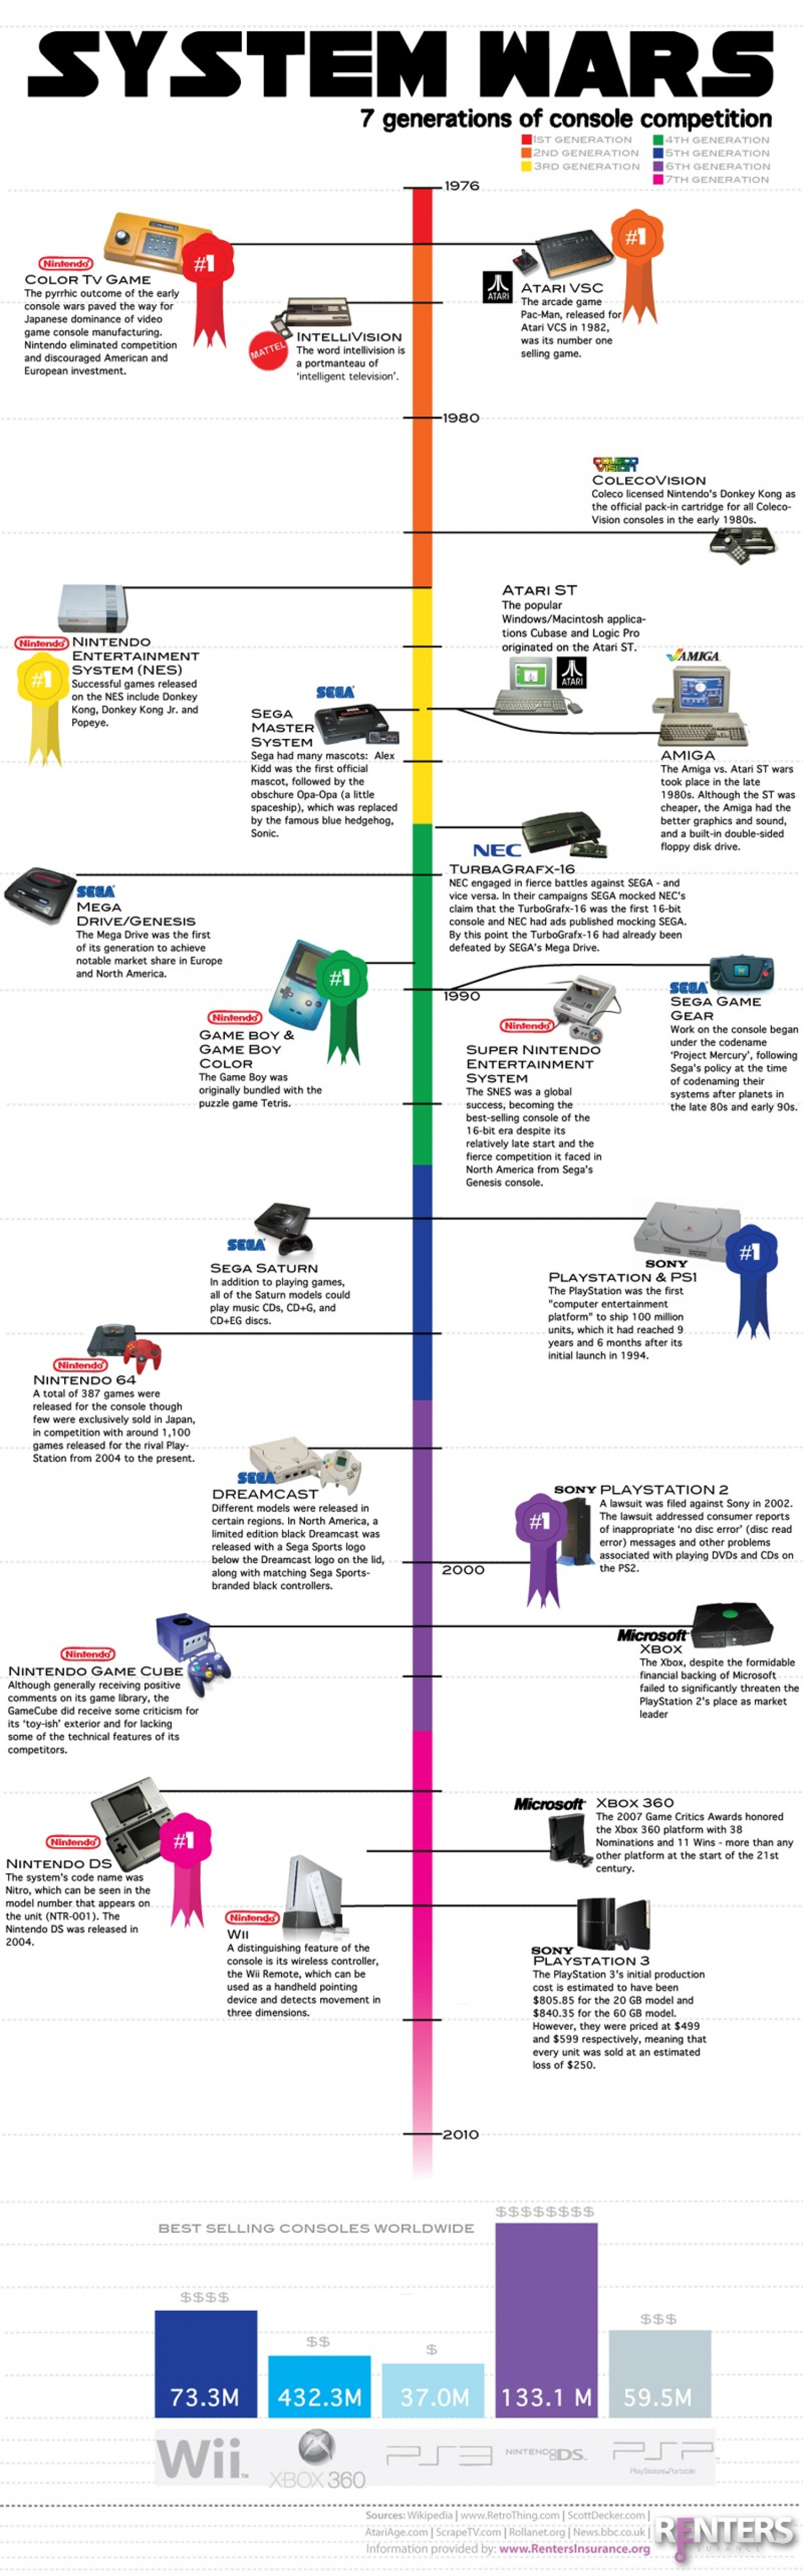 System Wars: 7 Generations of Console Competition Infographic